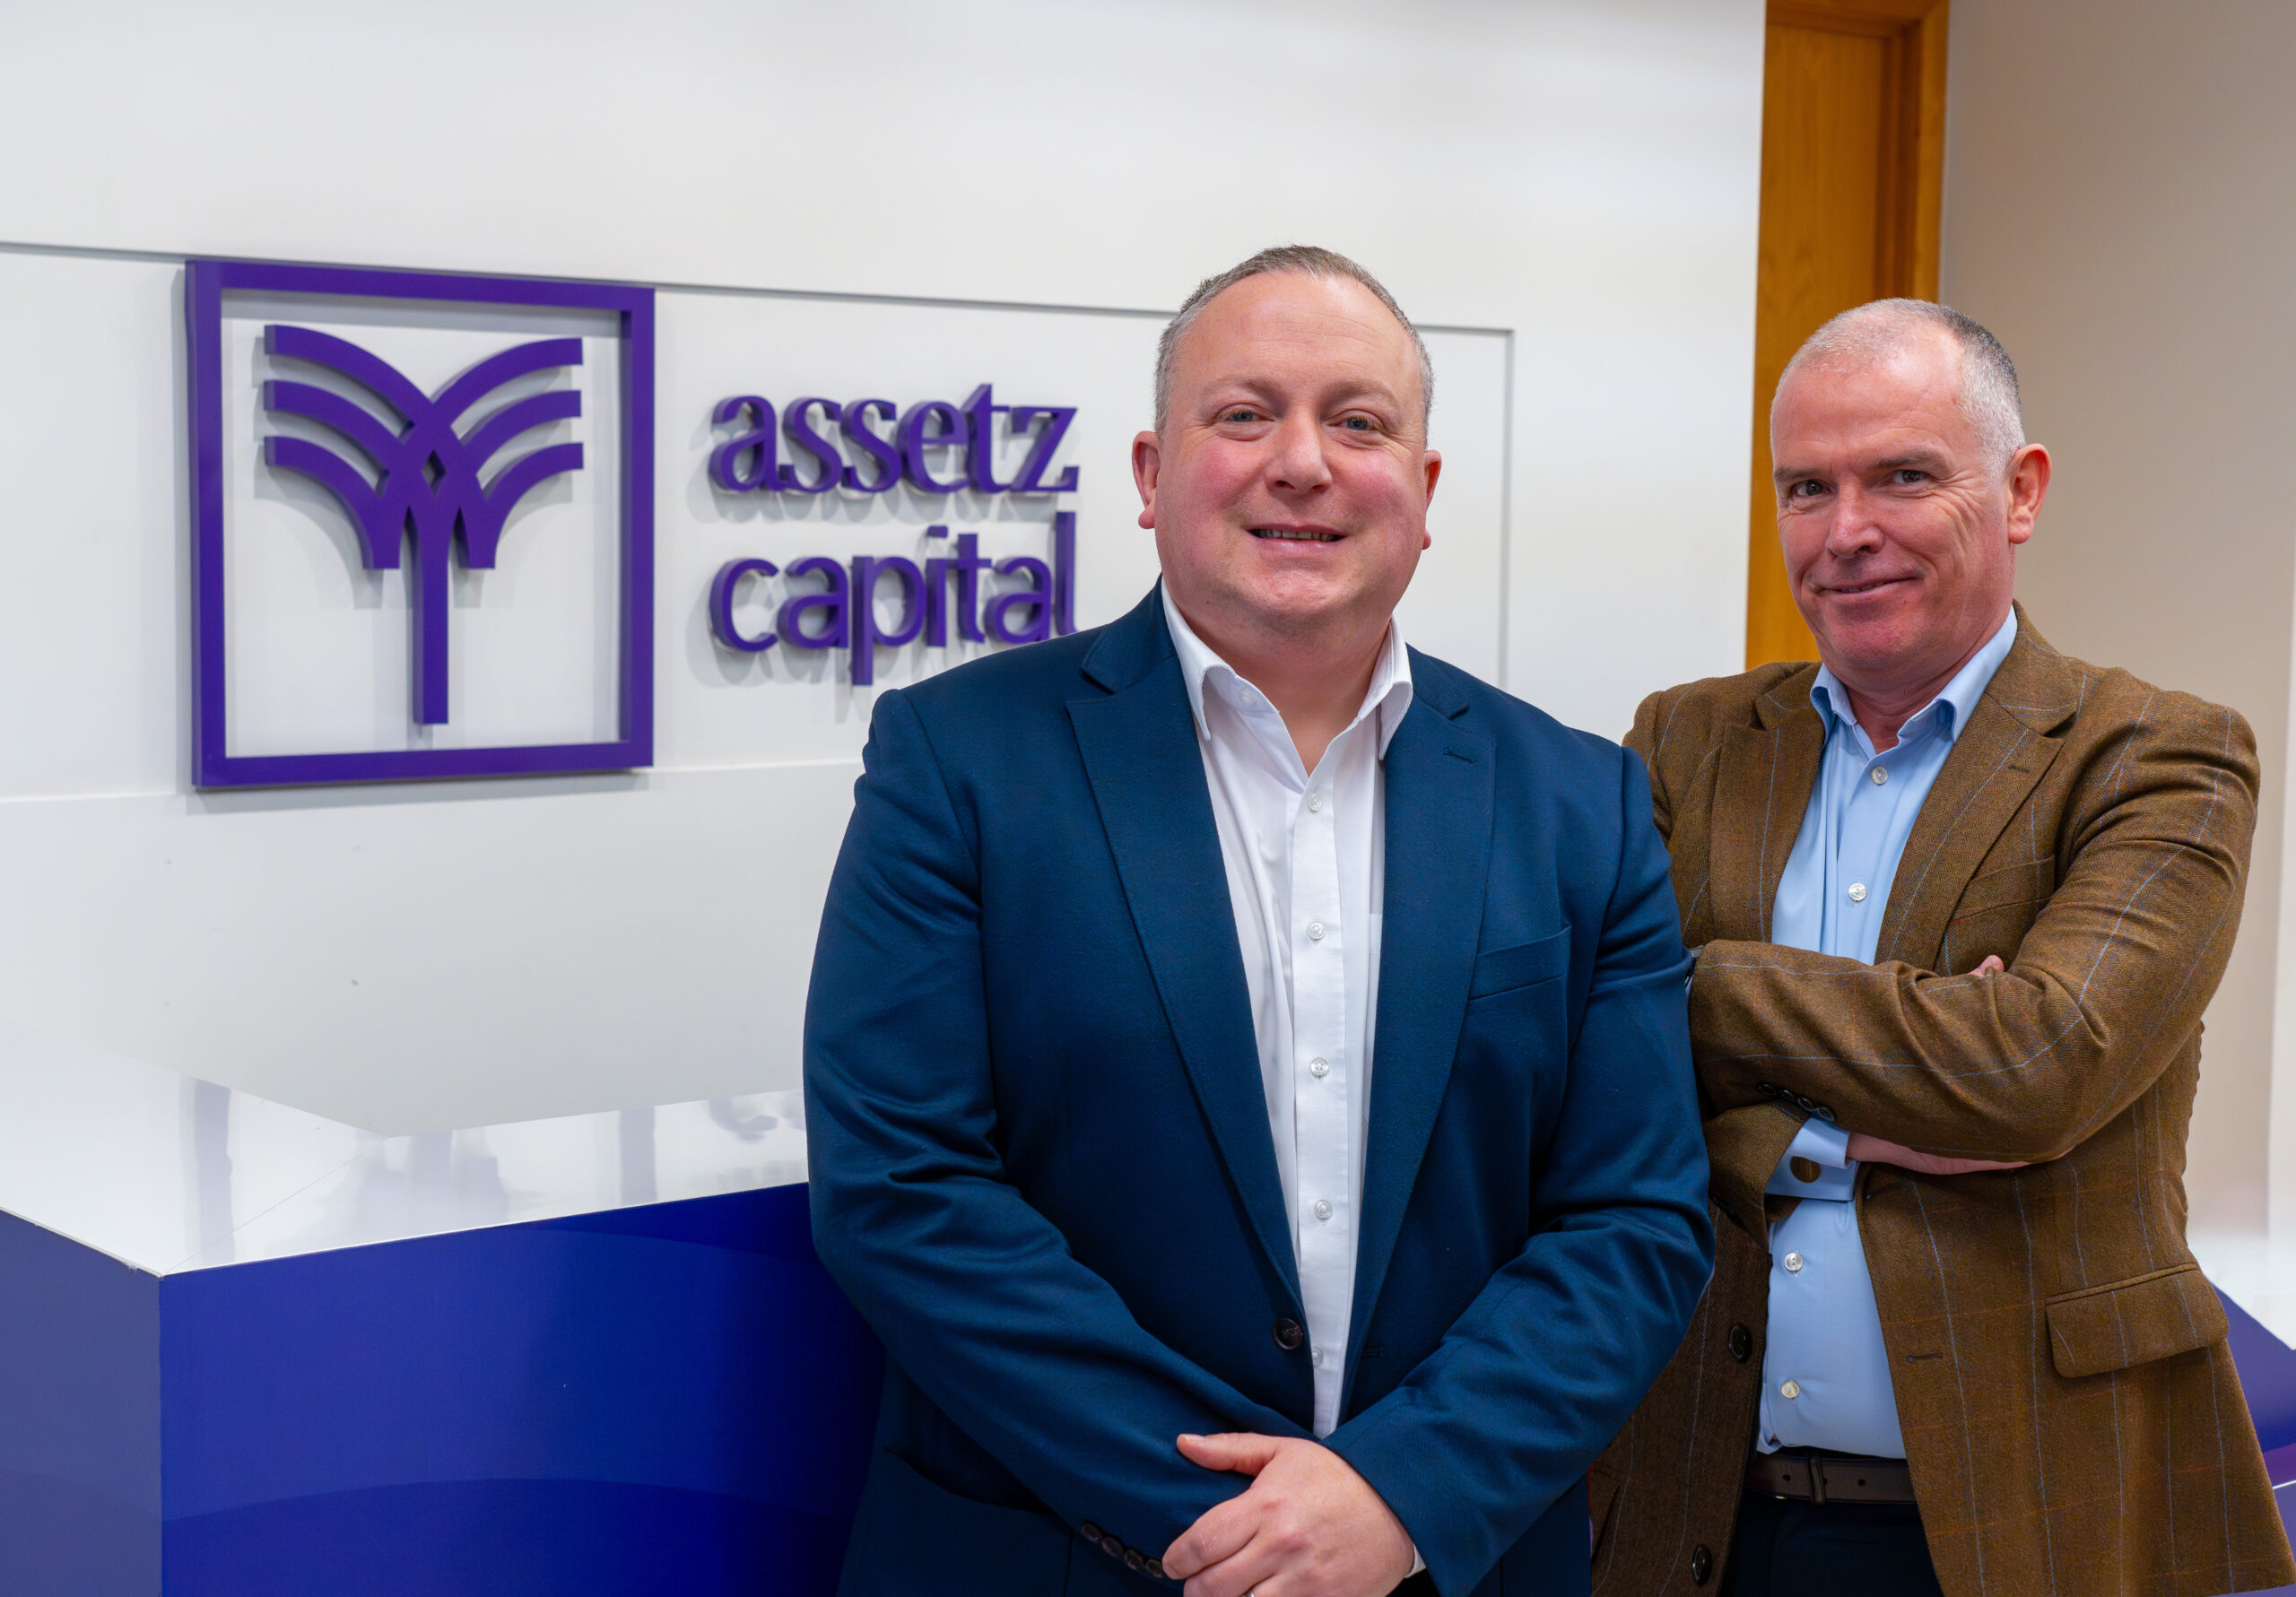 Assetz Capital commits to further investment in Northern Ireland